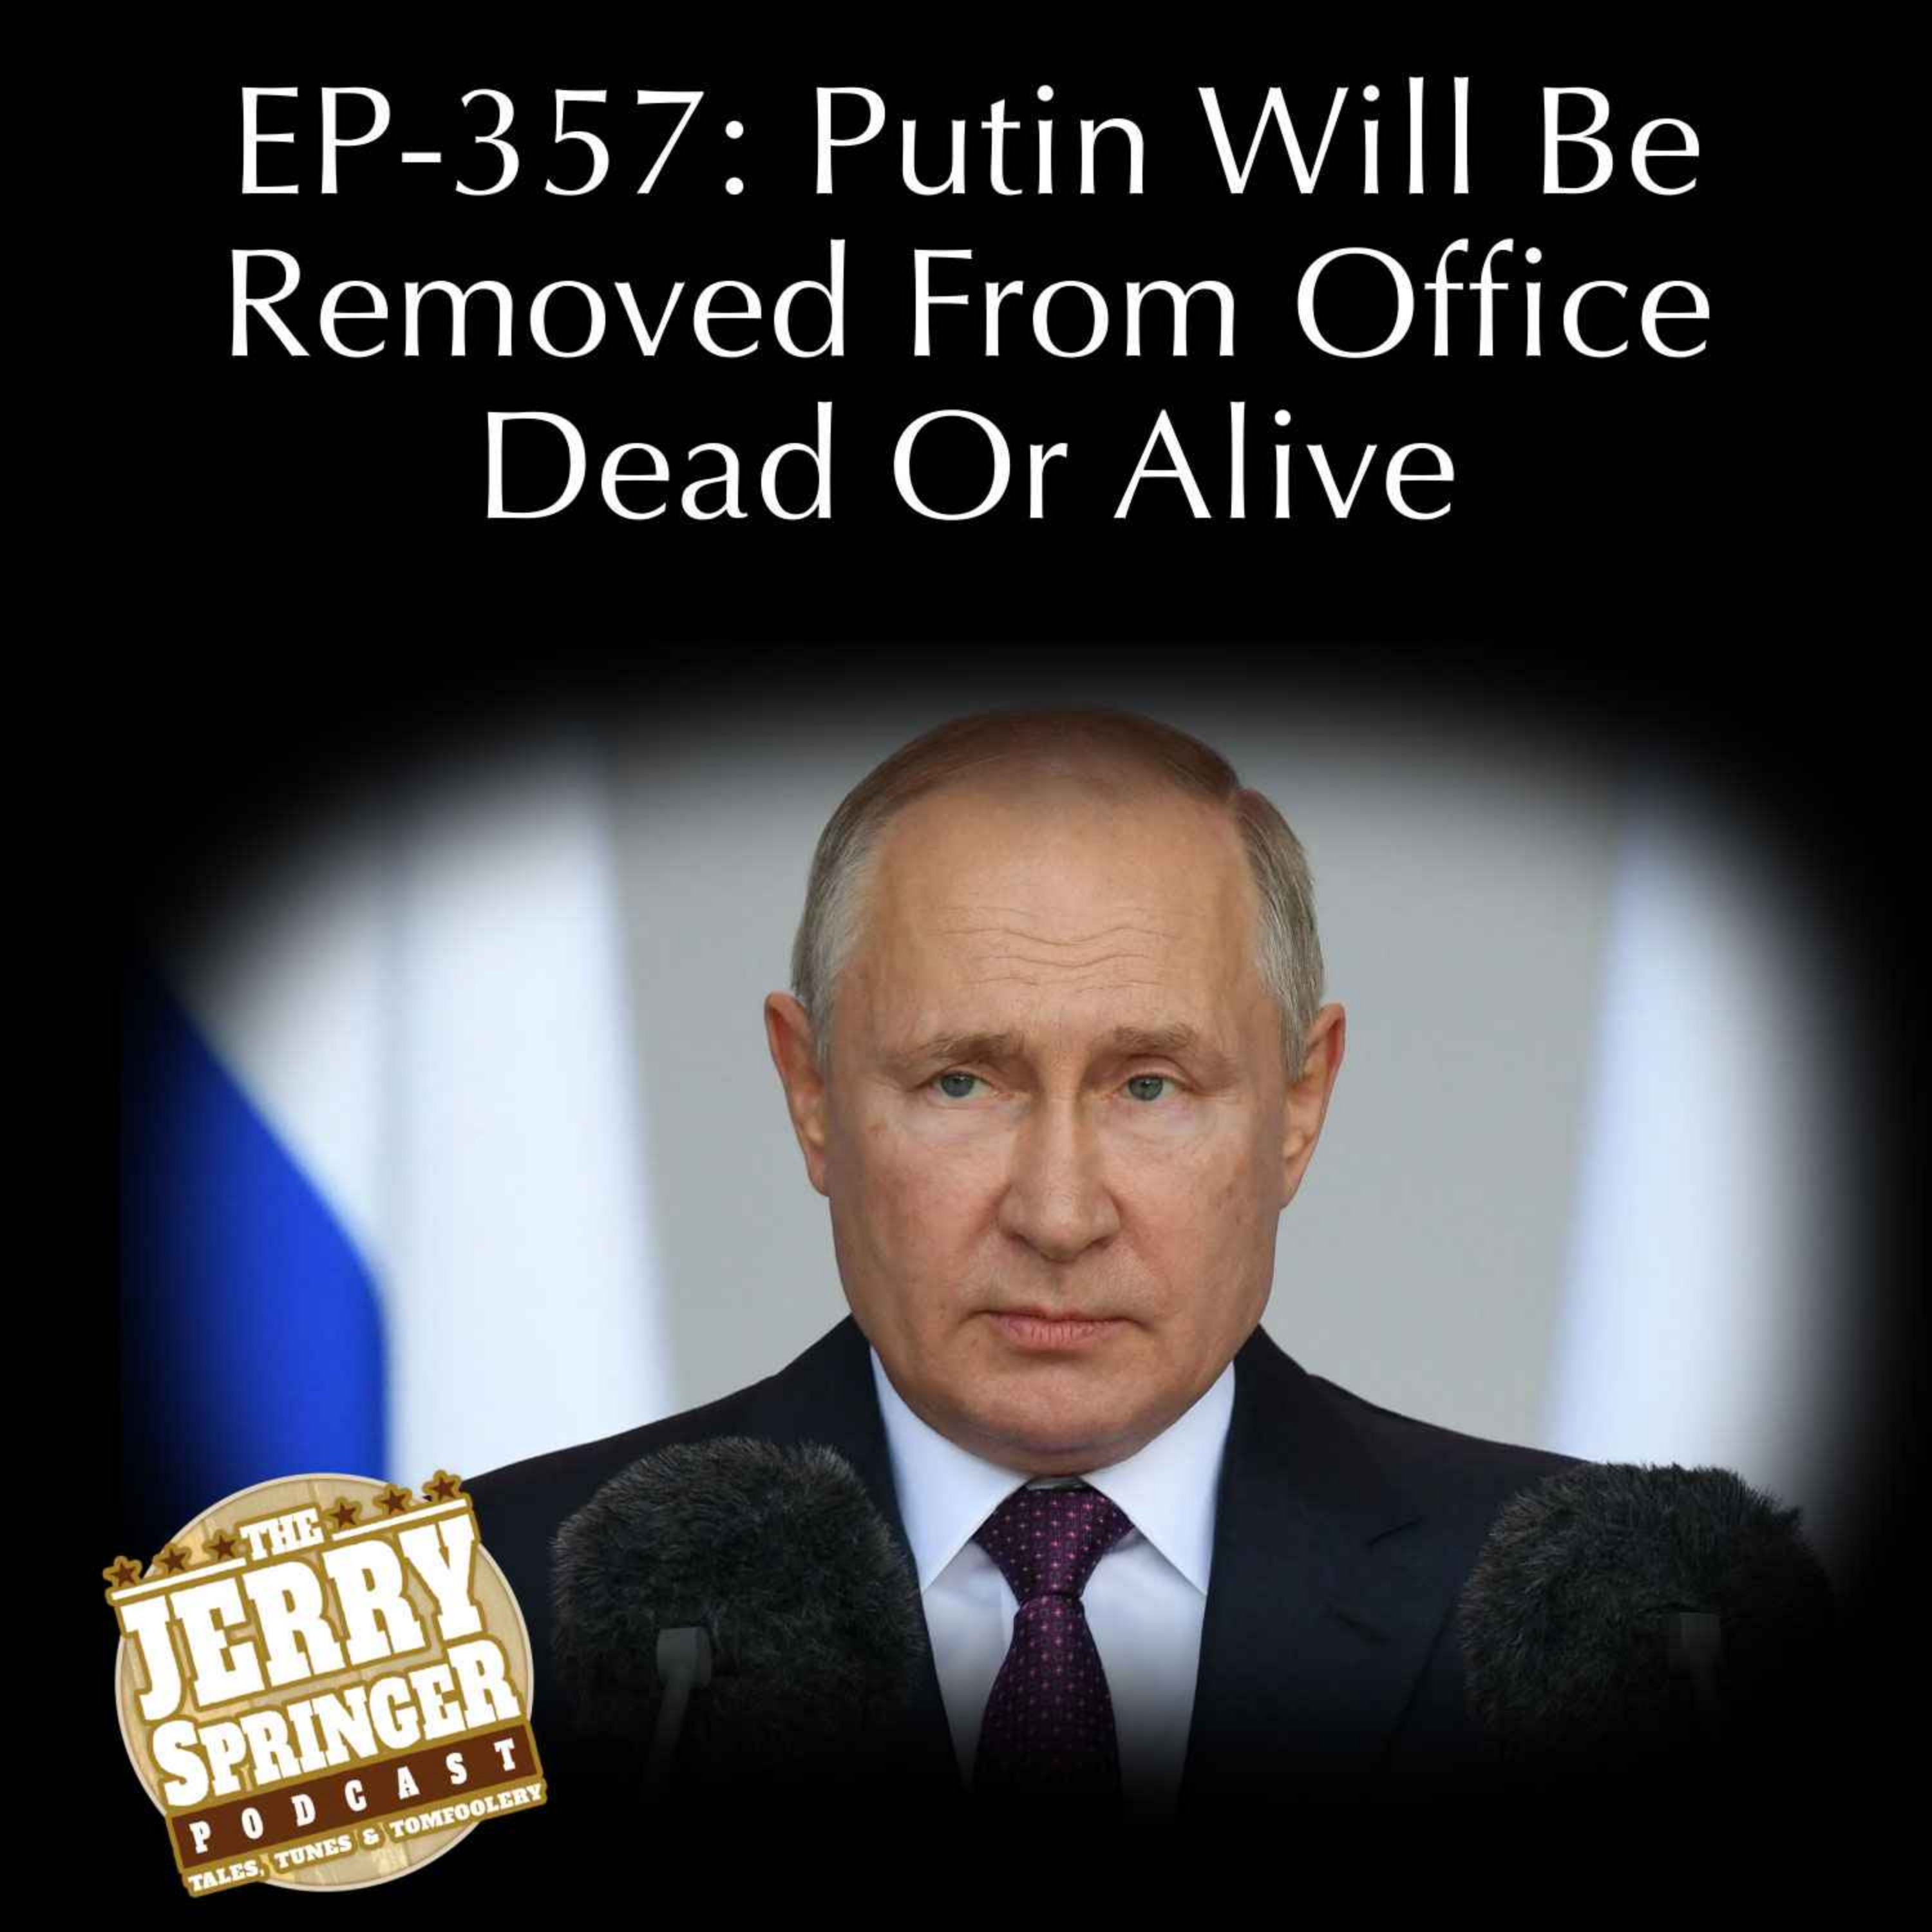 Putin Will Be Removed From Office Dead Or Alive: EP - 357